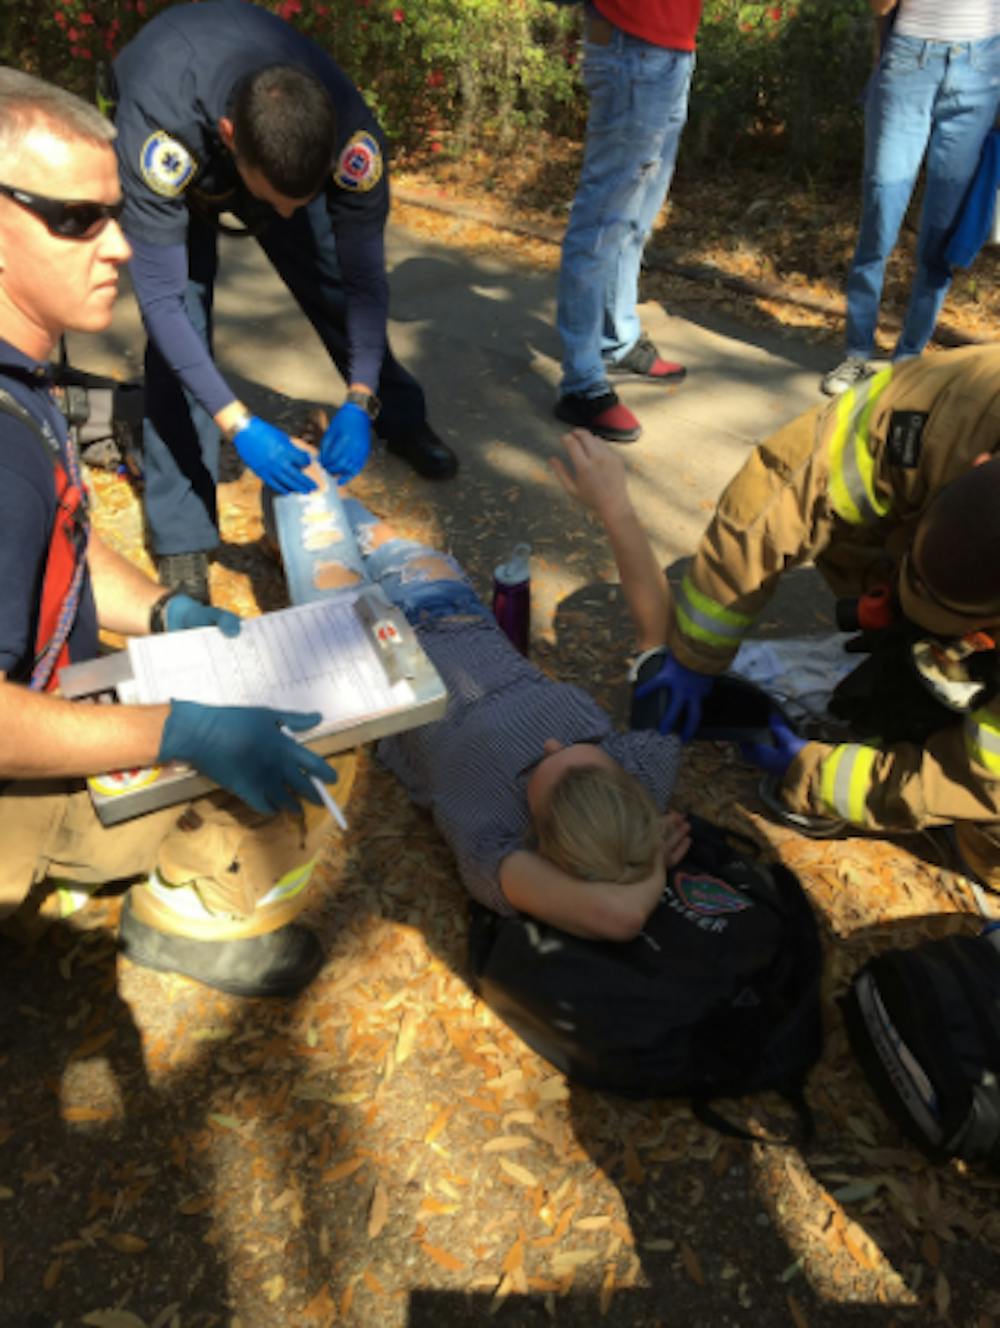 <p>An EMT responds to <span id="docs-internal-guid-4473ddcc-4e17-af4b-1e77-9ca5b36112d8"><span>Meredith Huggins who was</span></span>&nbsp;hit by a car while on her scooter. She had leg pain and struggling to straighten her leg.</p>